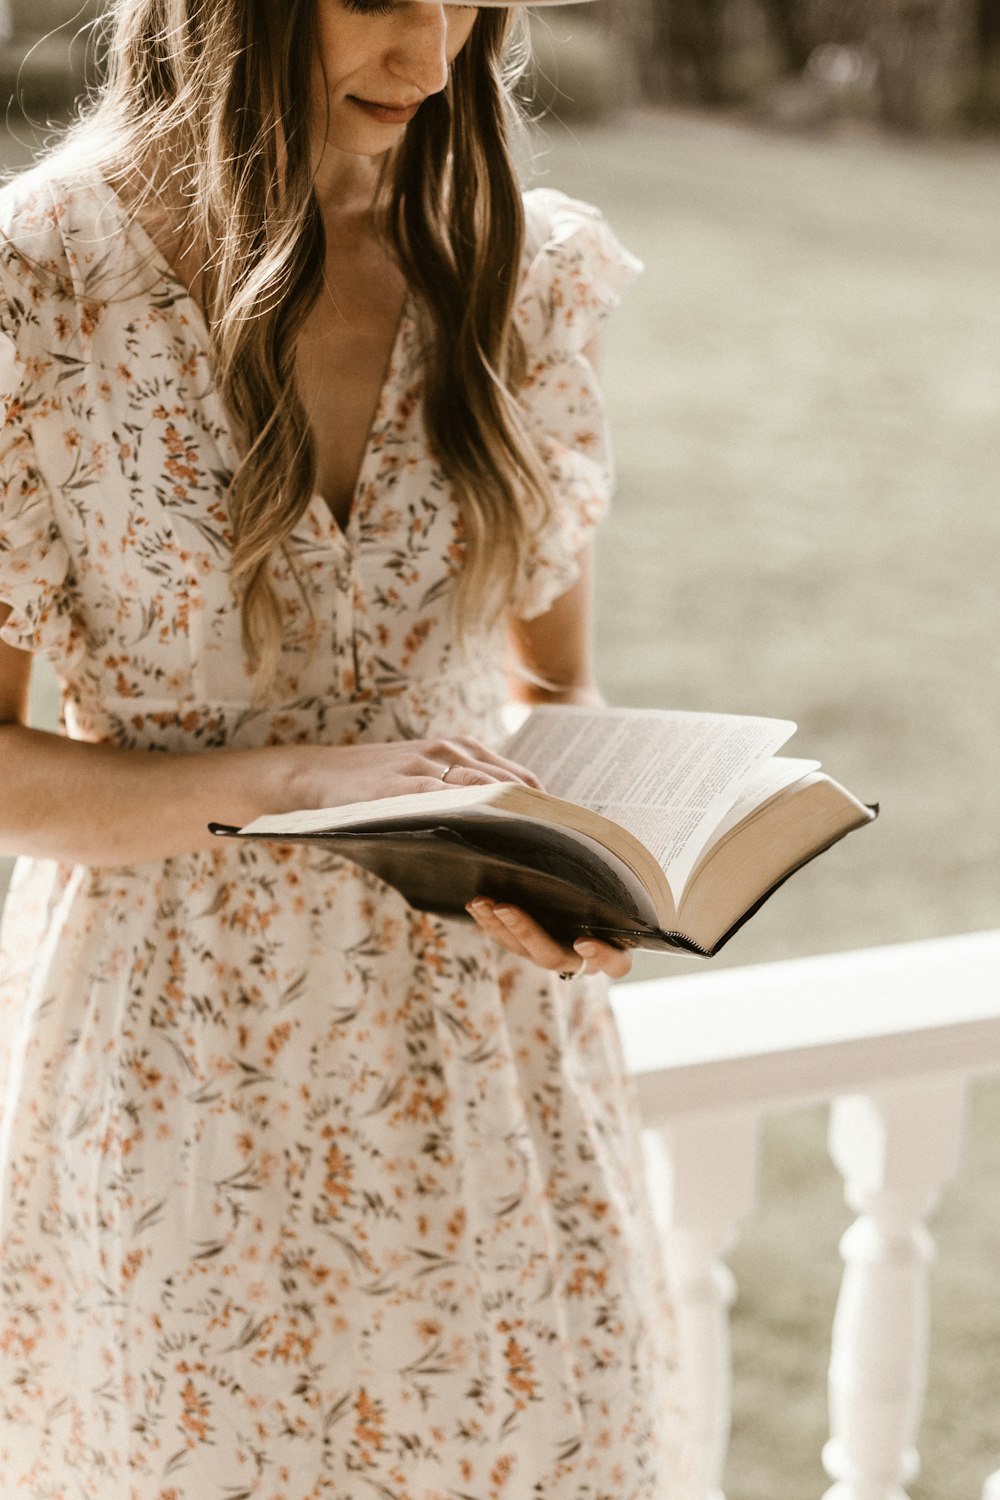 woman in white and brown floral dress reading book